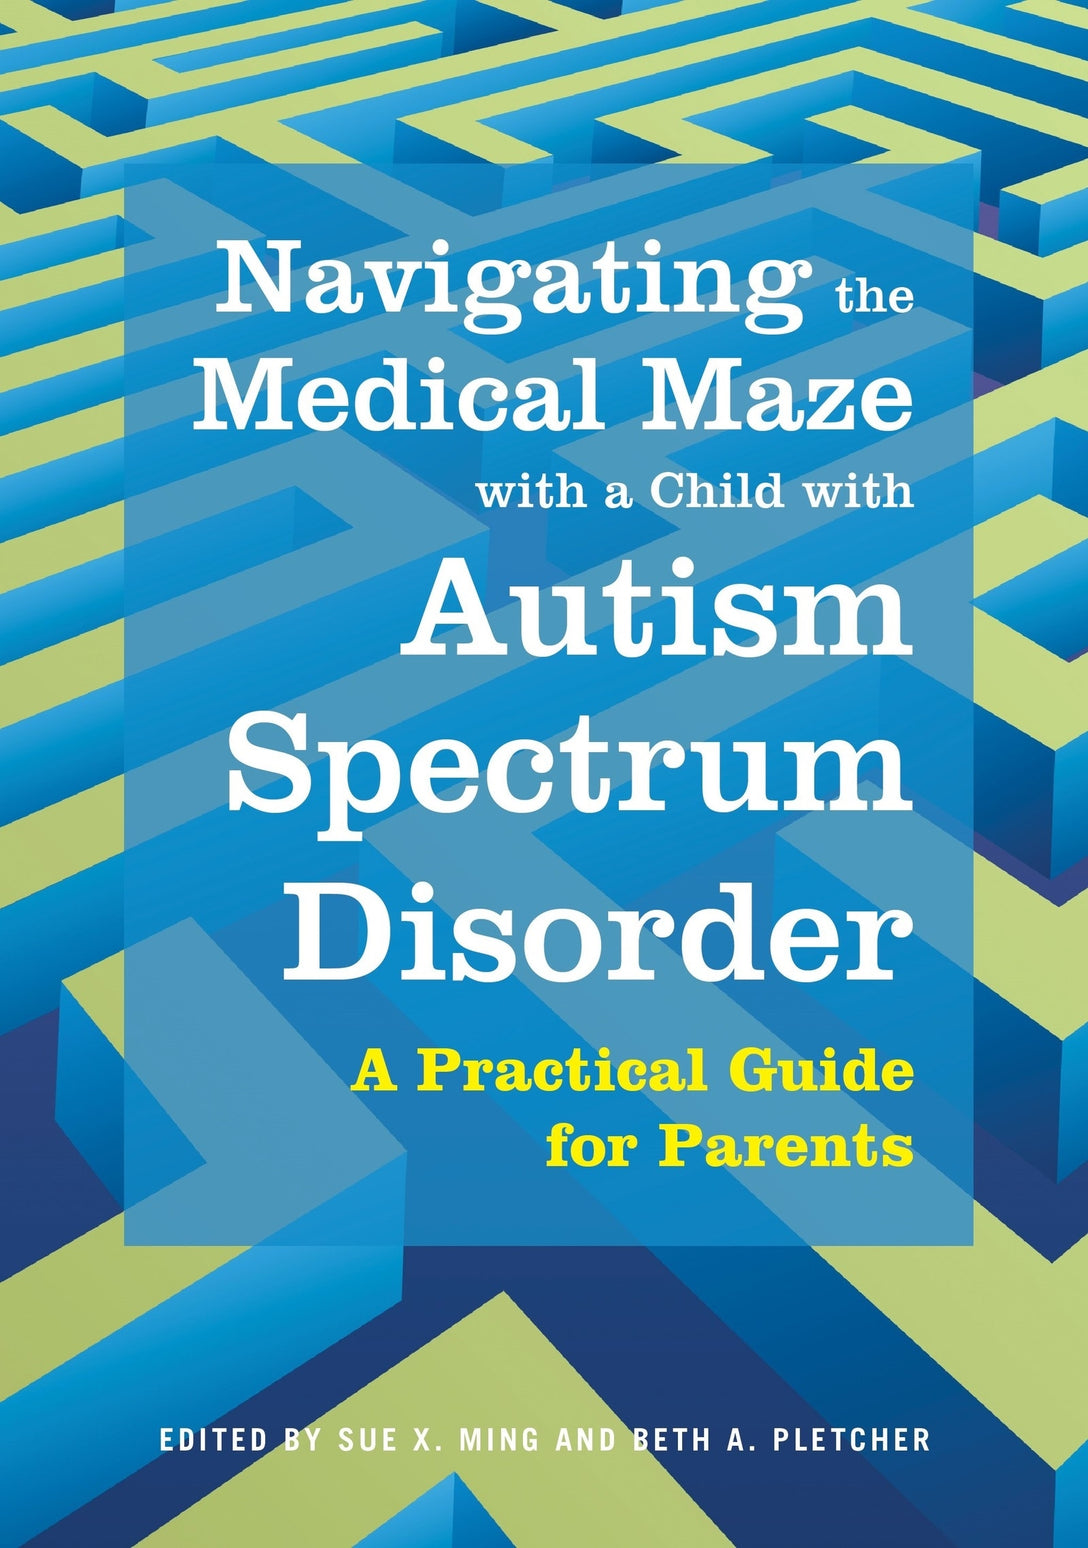 Navigating the Medical Maze with a Child with Autism Spectrum Disorder by Sue Ming, Beth Pletcher